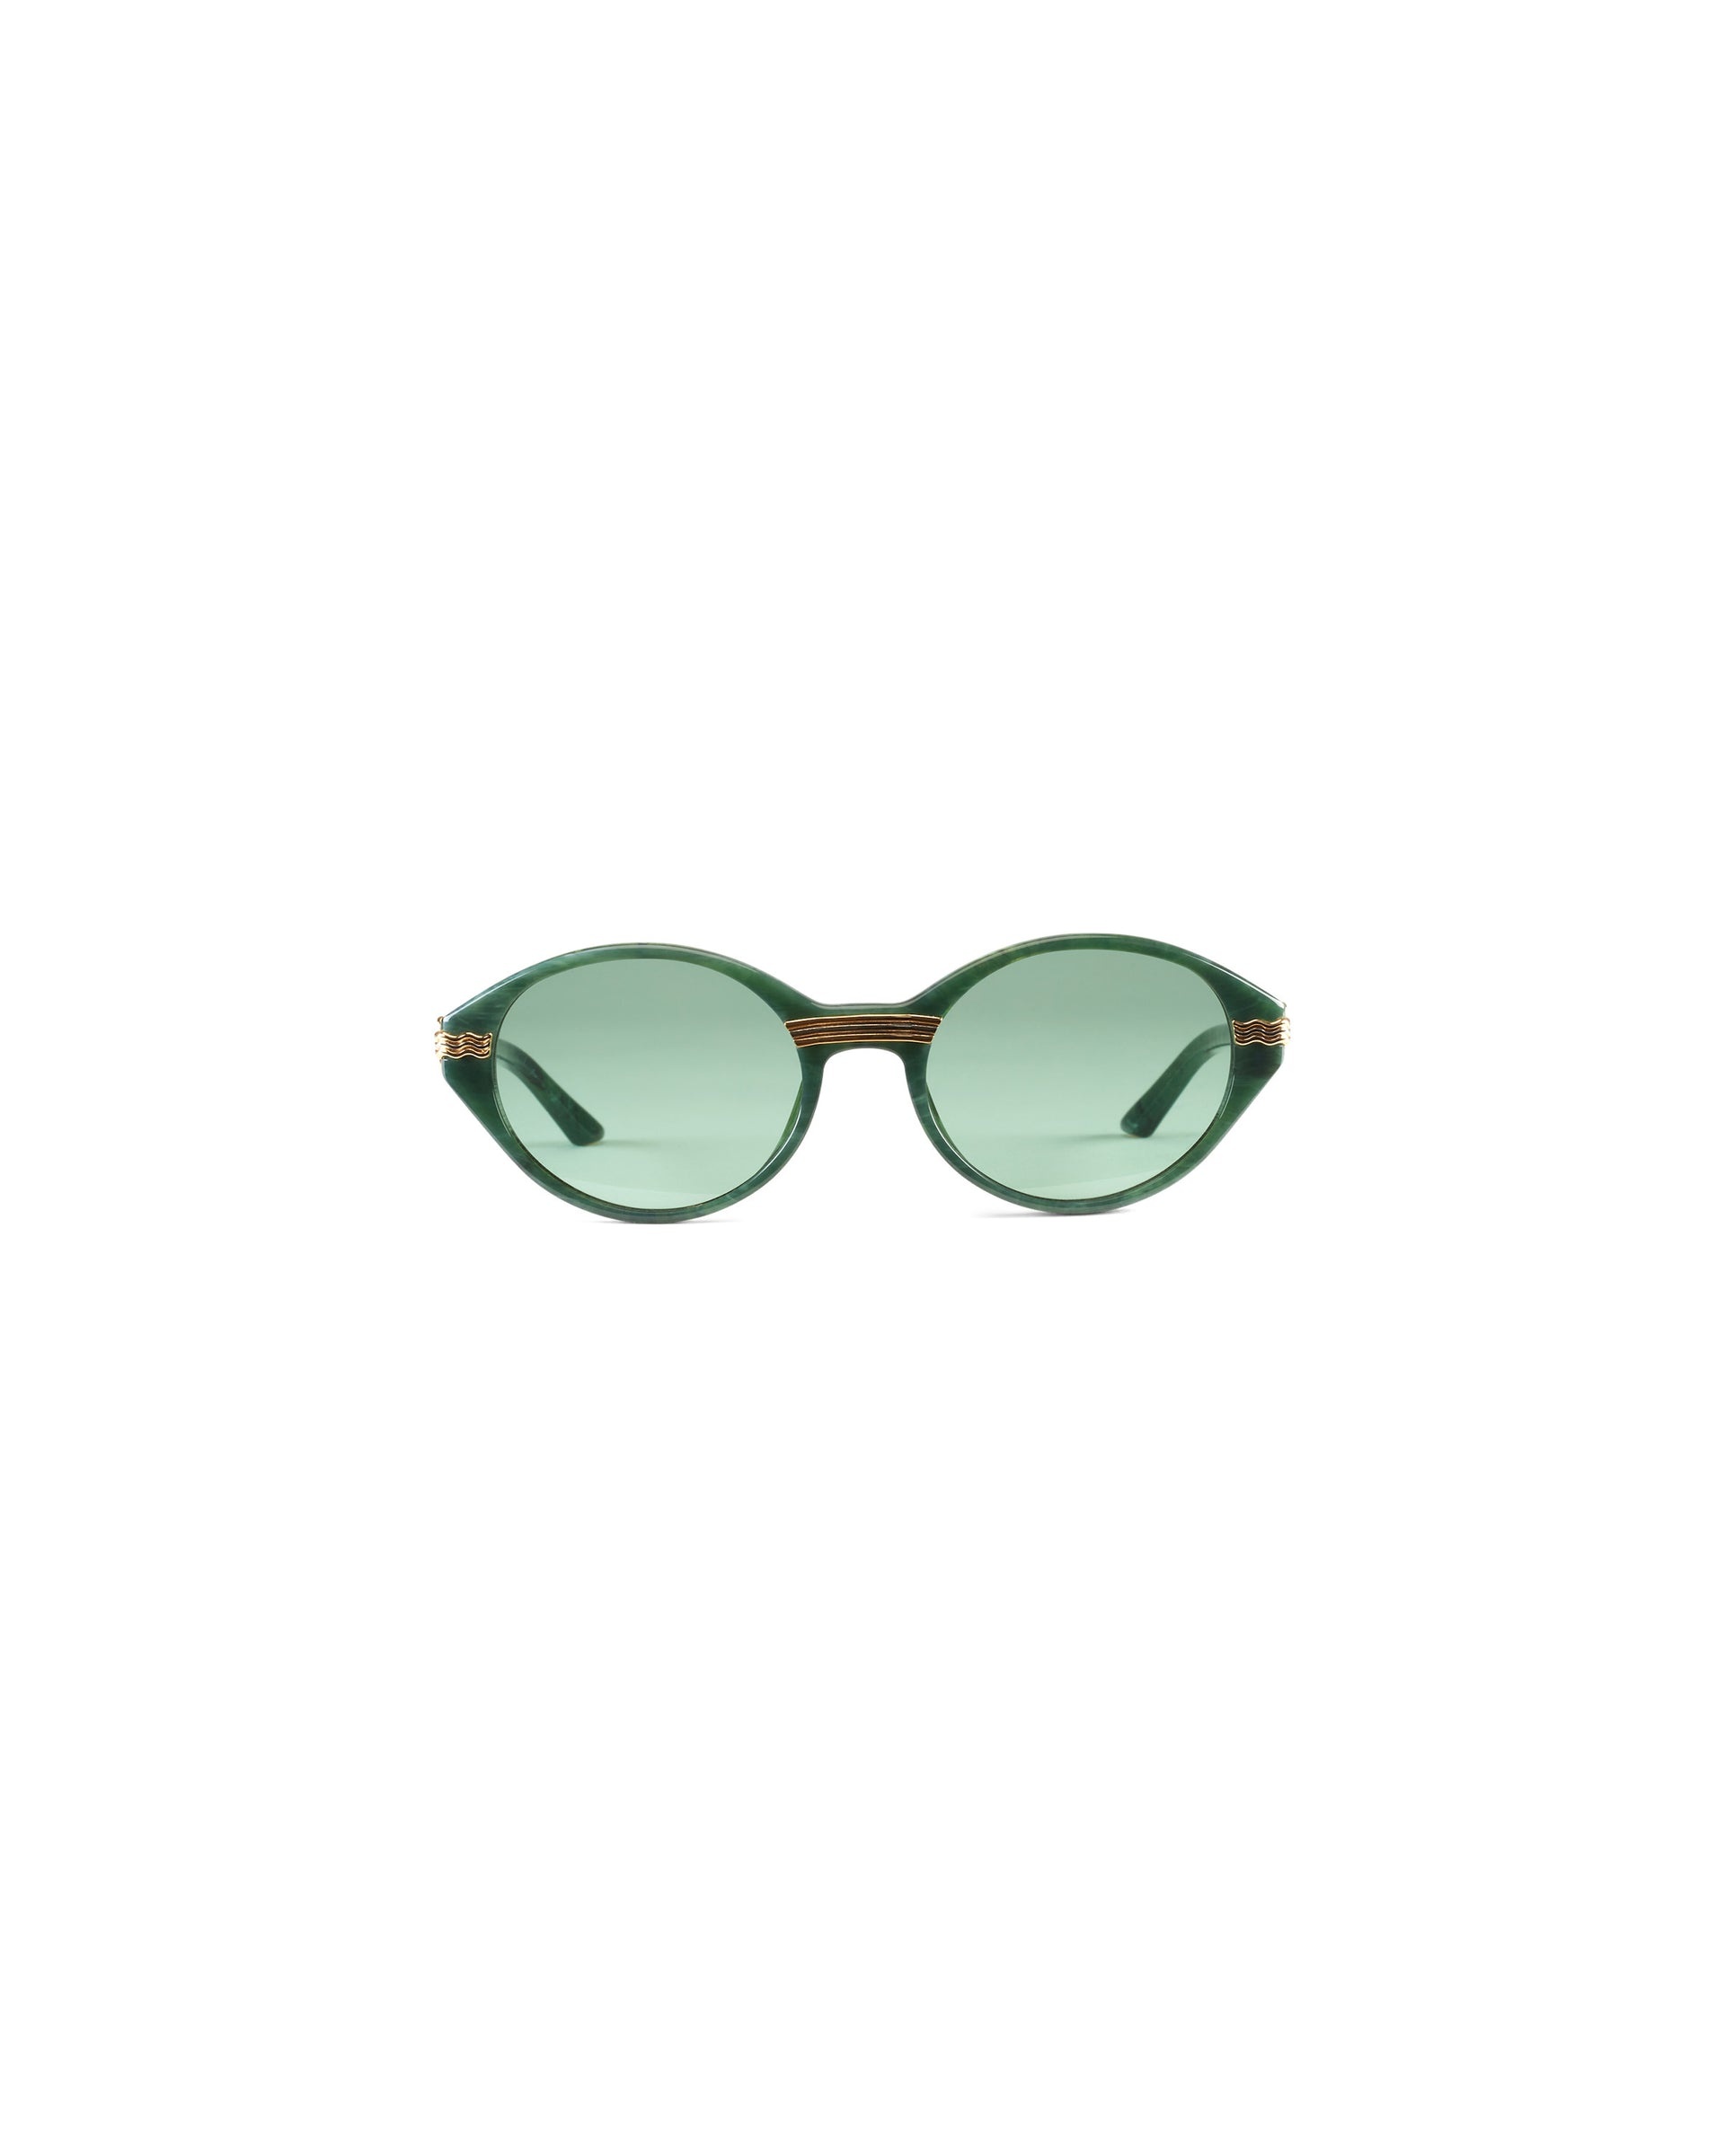 Green & Gold Cannes Sunglasses - 2